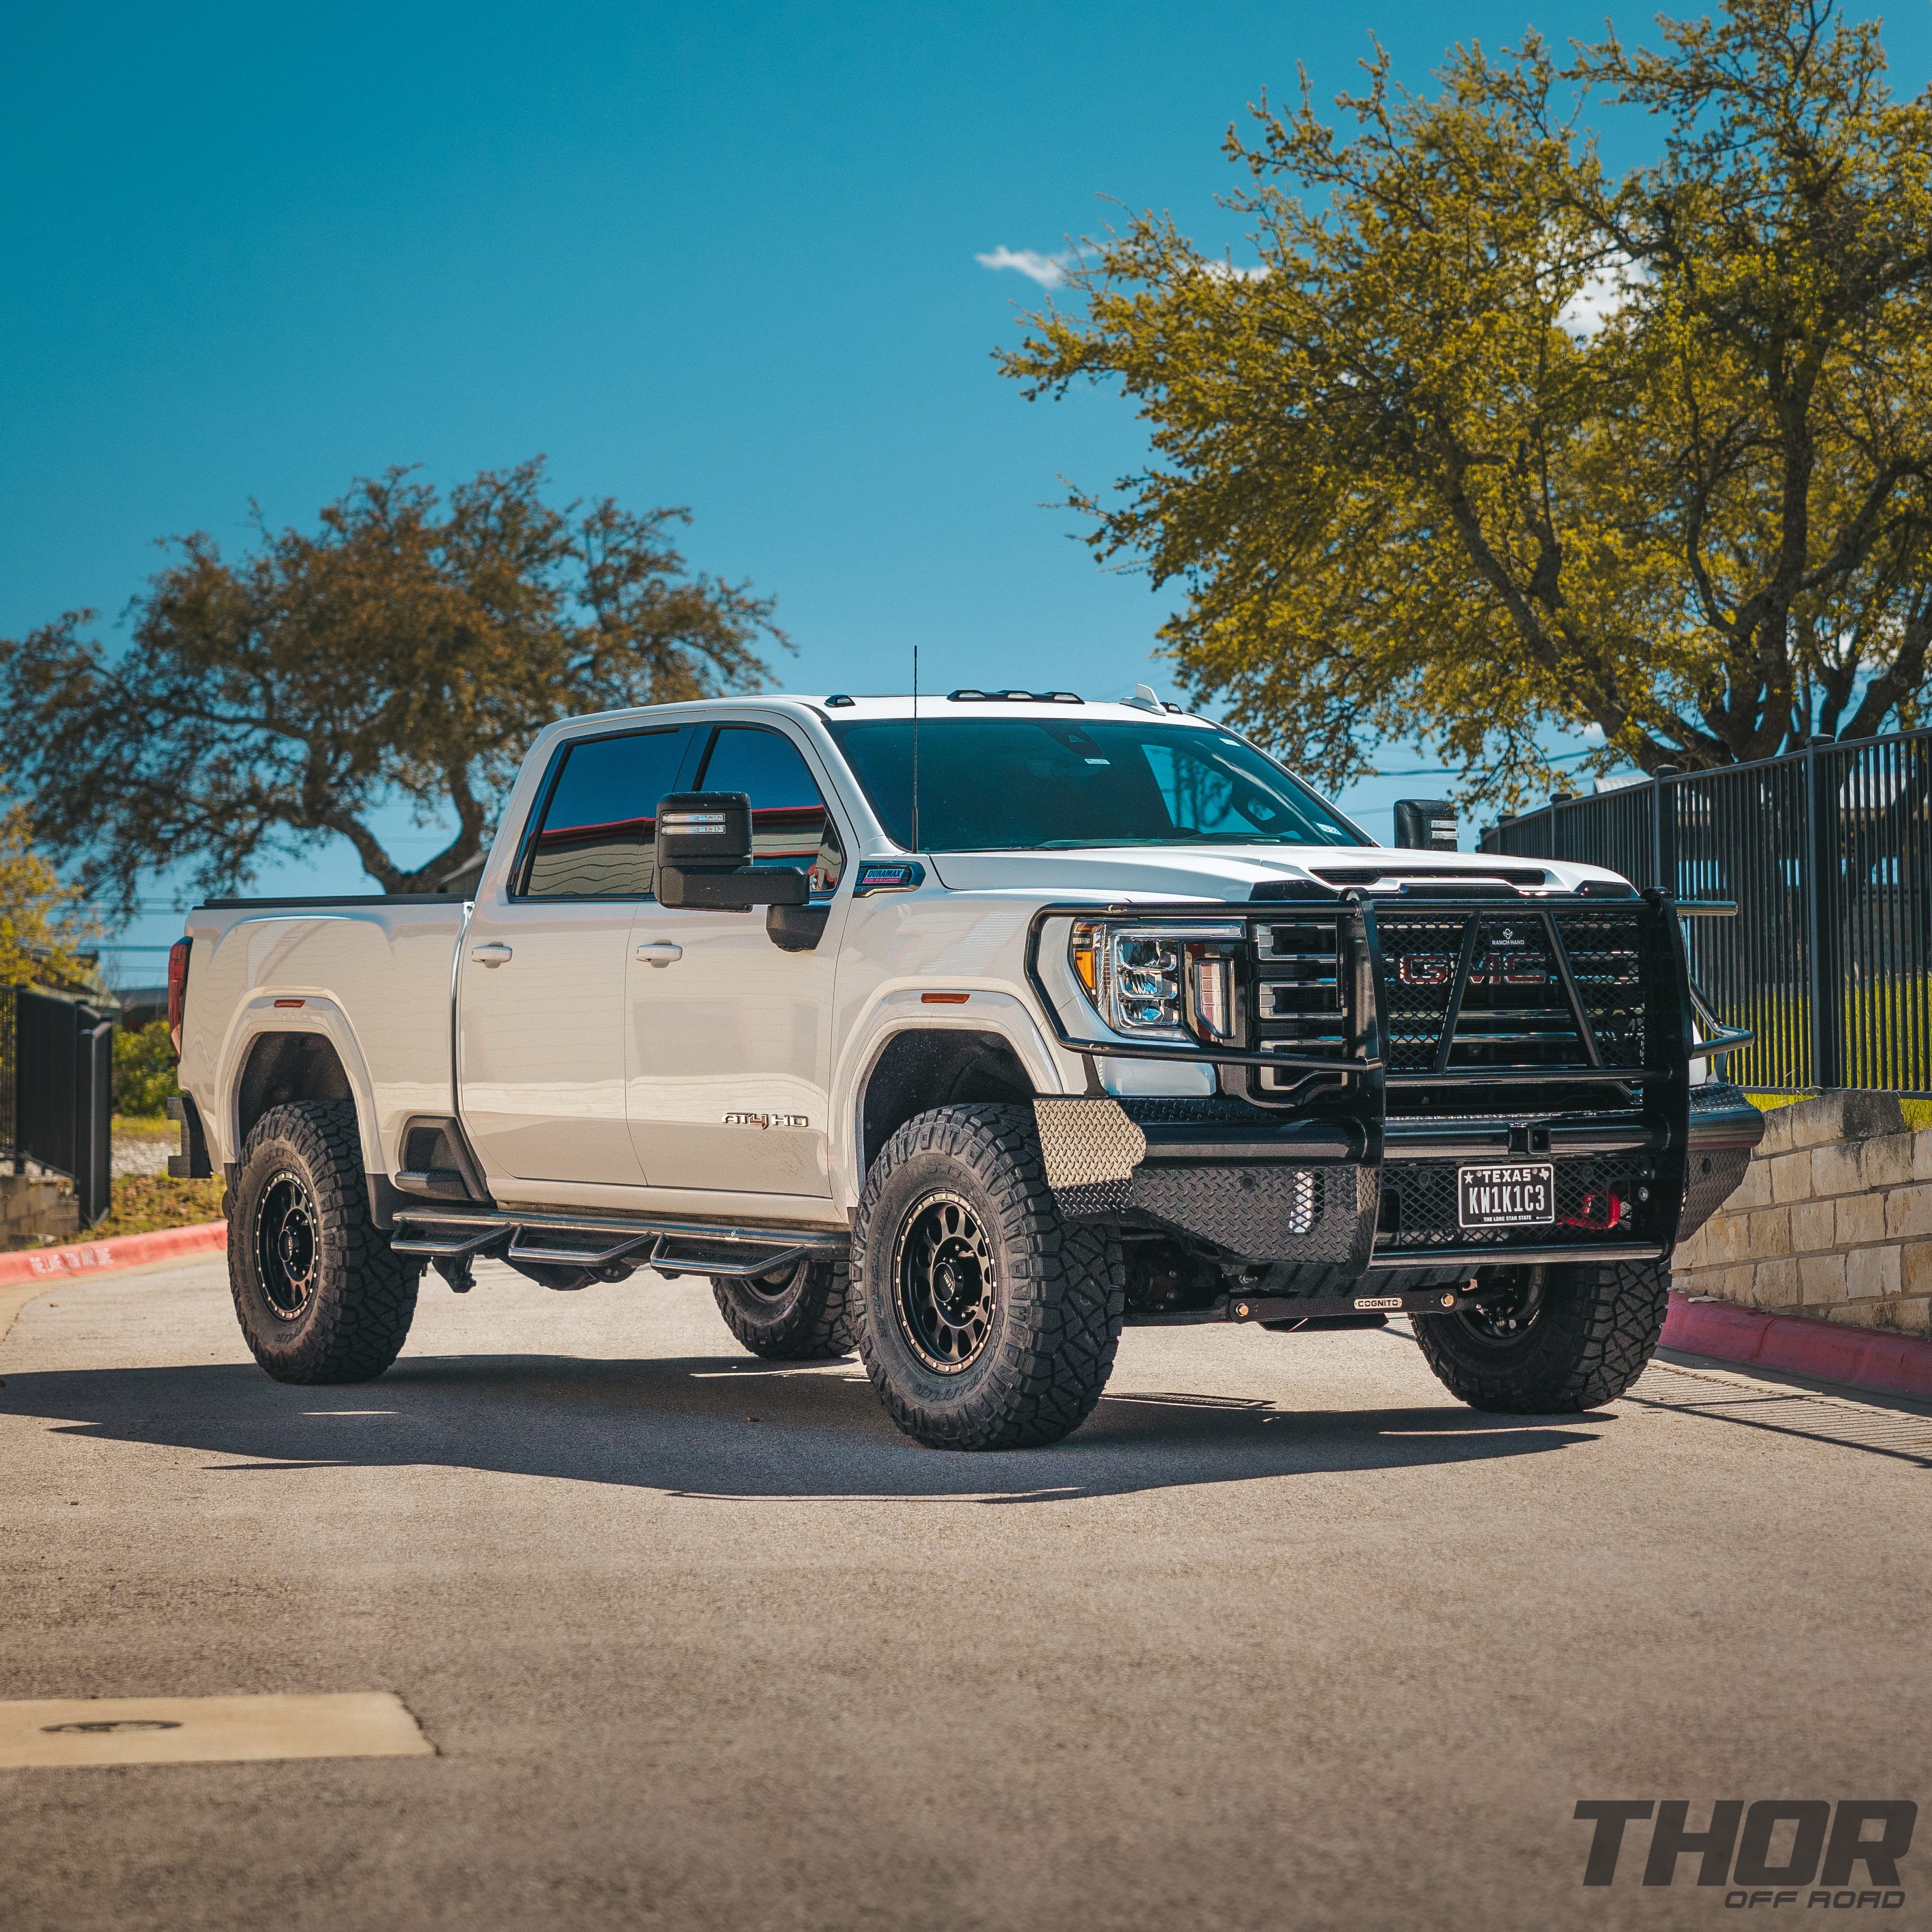 2022 GMC Sierra 2500 HD AT4 in White with 4" Cognito Performance Suspension Kit, 18" Method MR315 Wheels, 37x12.50R18 Nitto Ridge Grappler Tires, Ranch Hand Legend Front Bumper, Ranch Hand Legend Rear Bumper, Ranch Hand Wheel to Wheel Steps